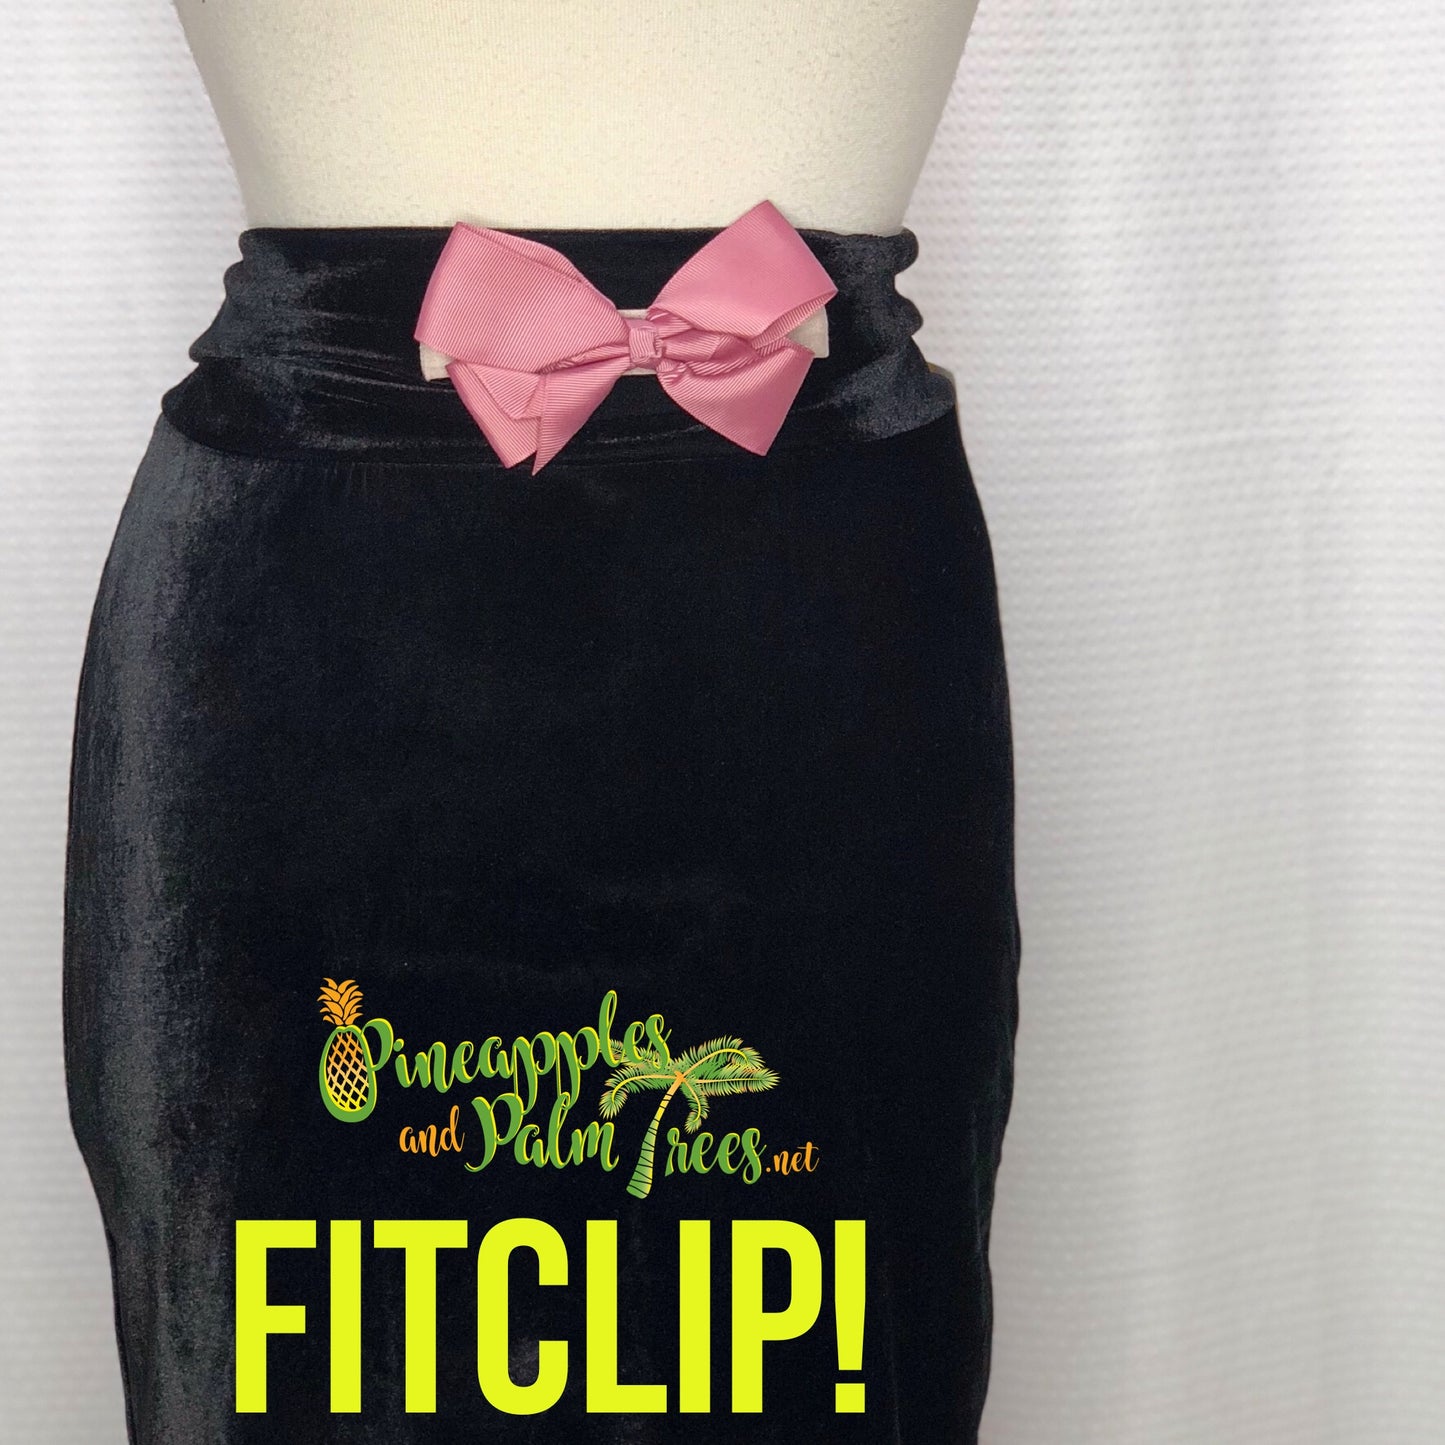 FitClips: Plum and Done - purple